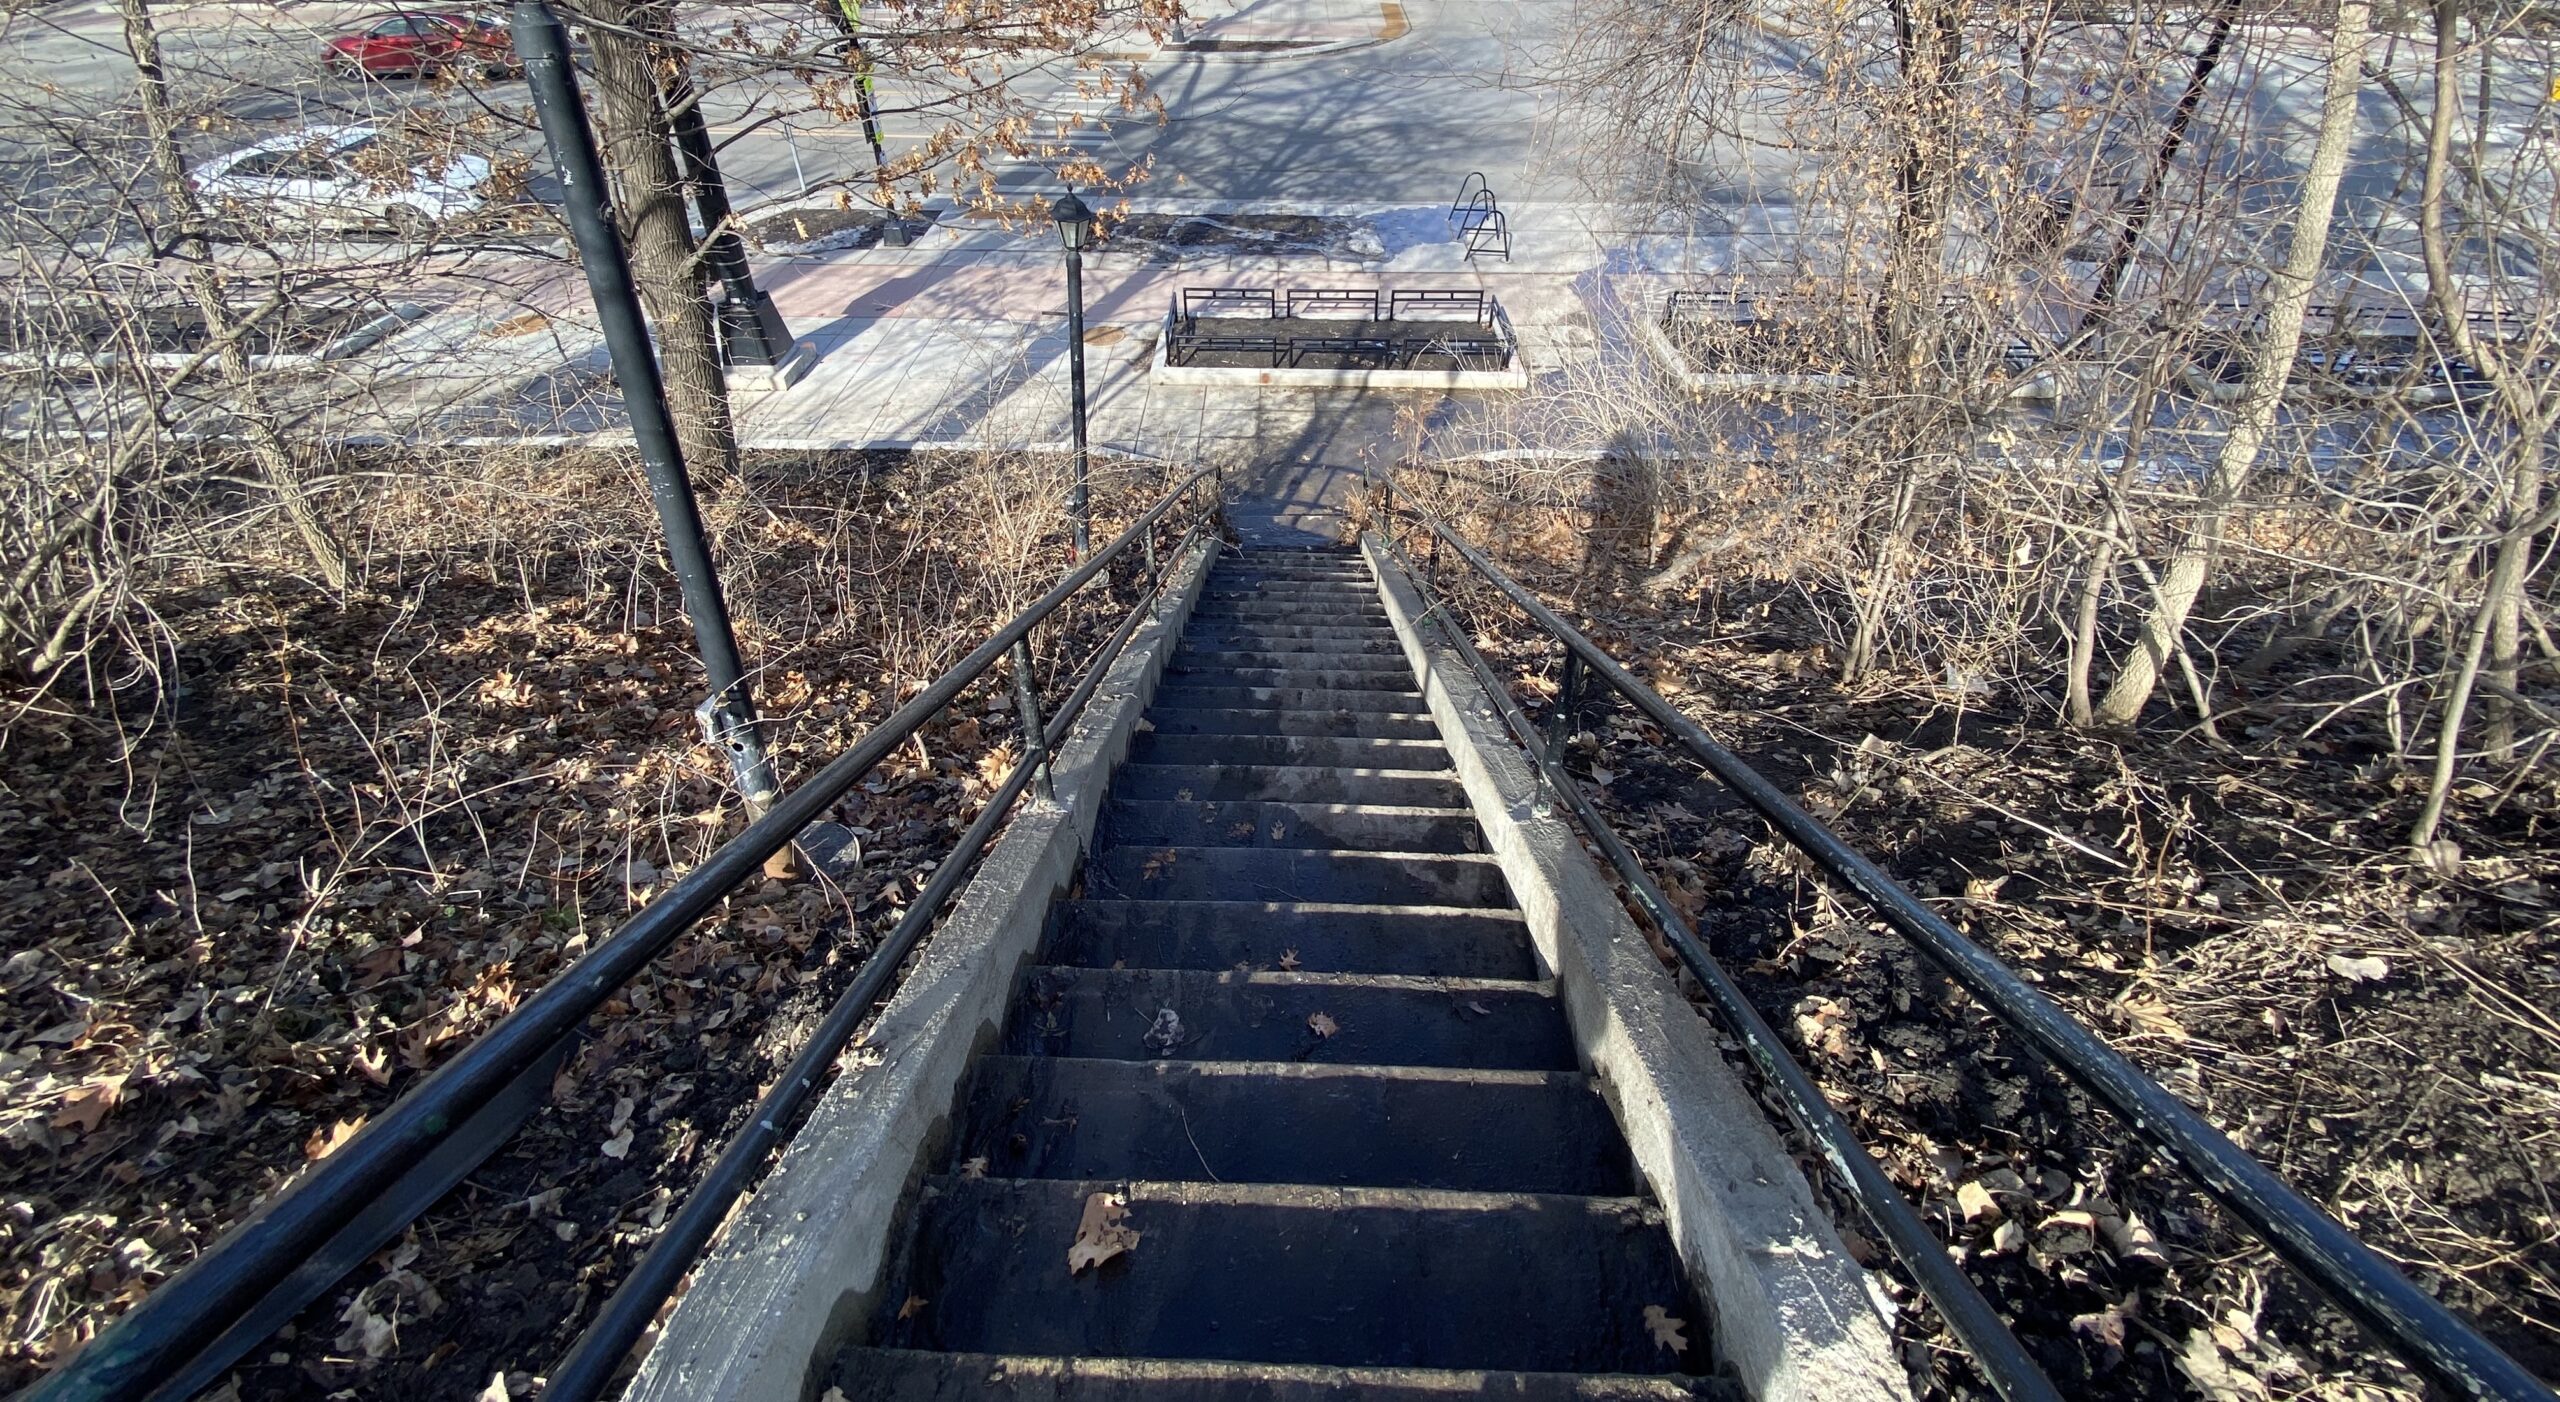 Ingersoll staircase to be transformed into public art pathway